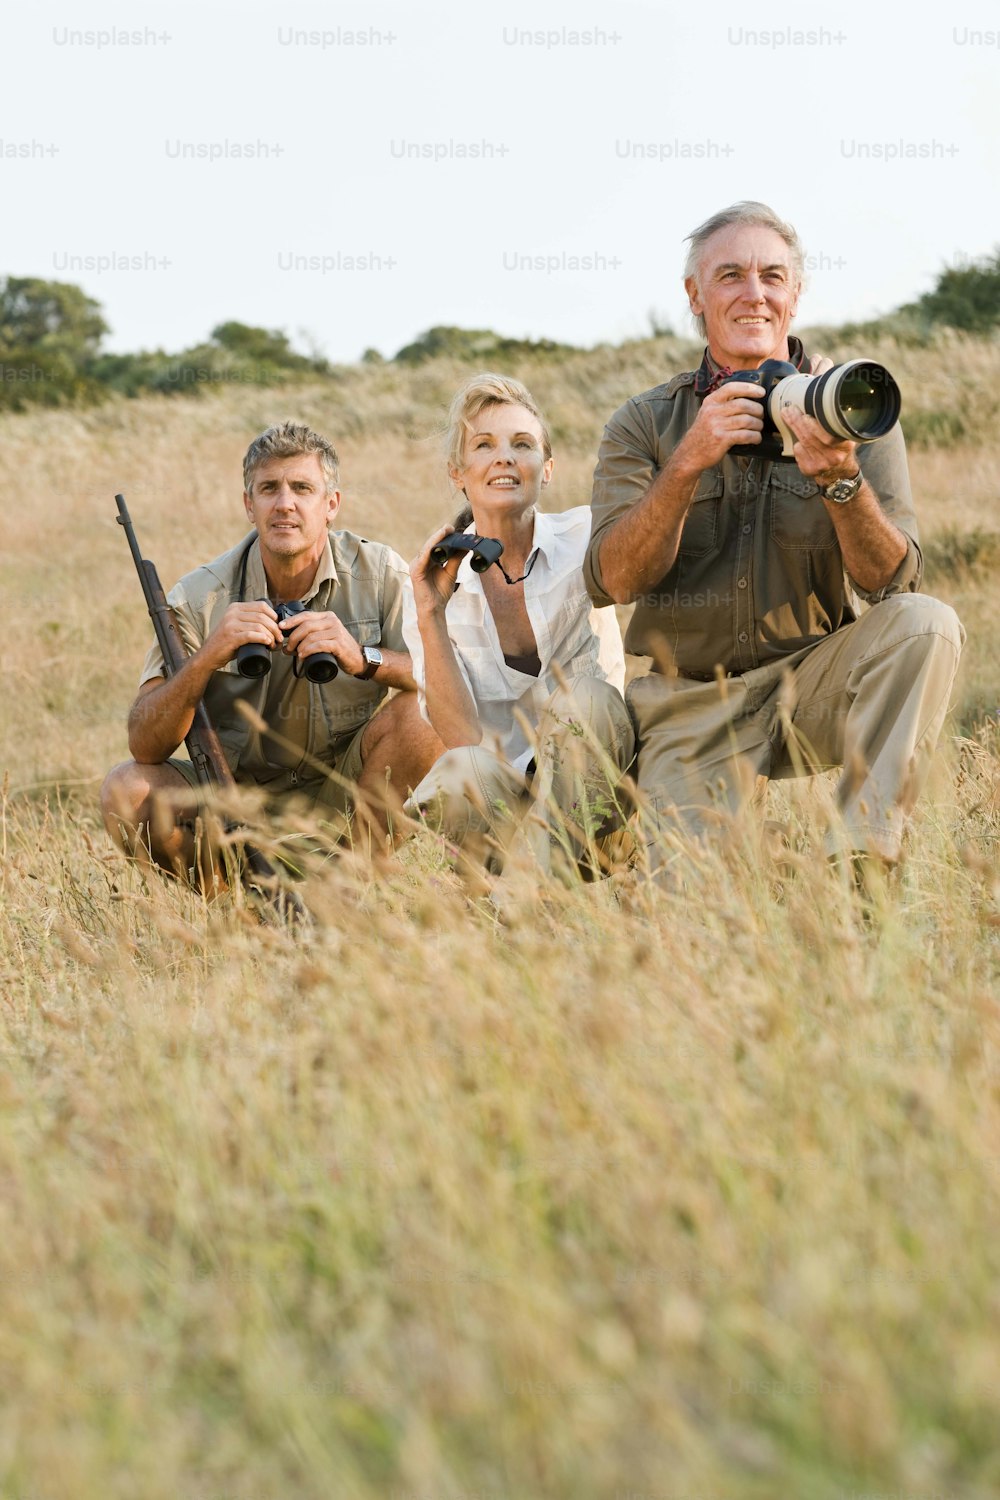 a group of people taking pictures in a field